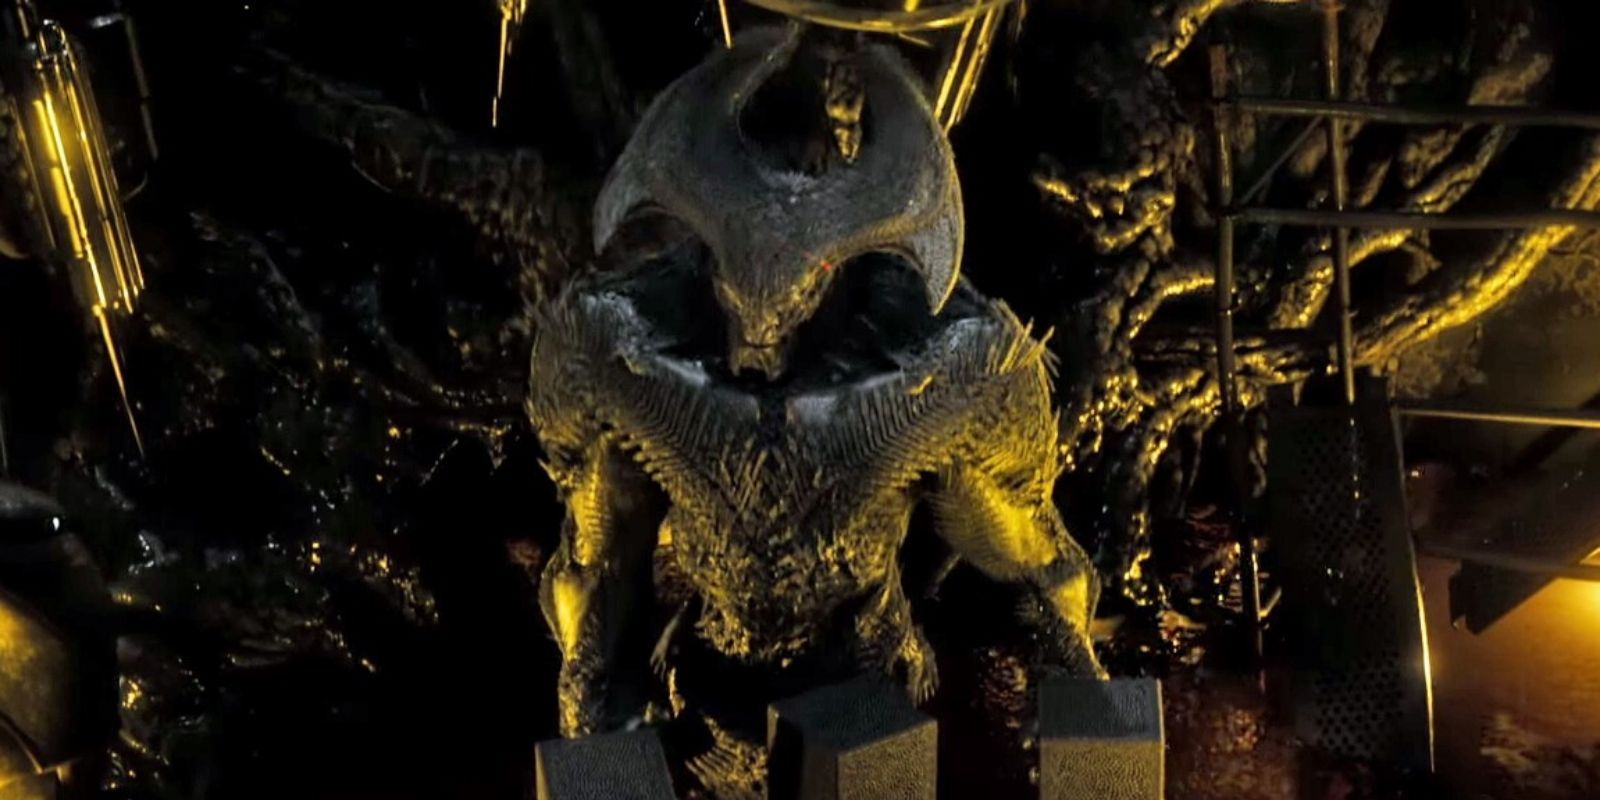 Steppenwolf from Batman v Superman Dawn of Justice